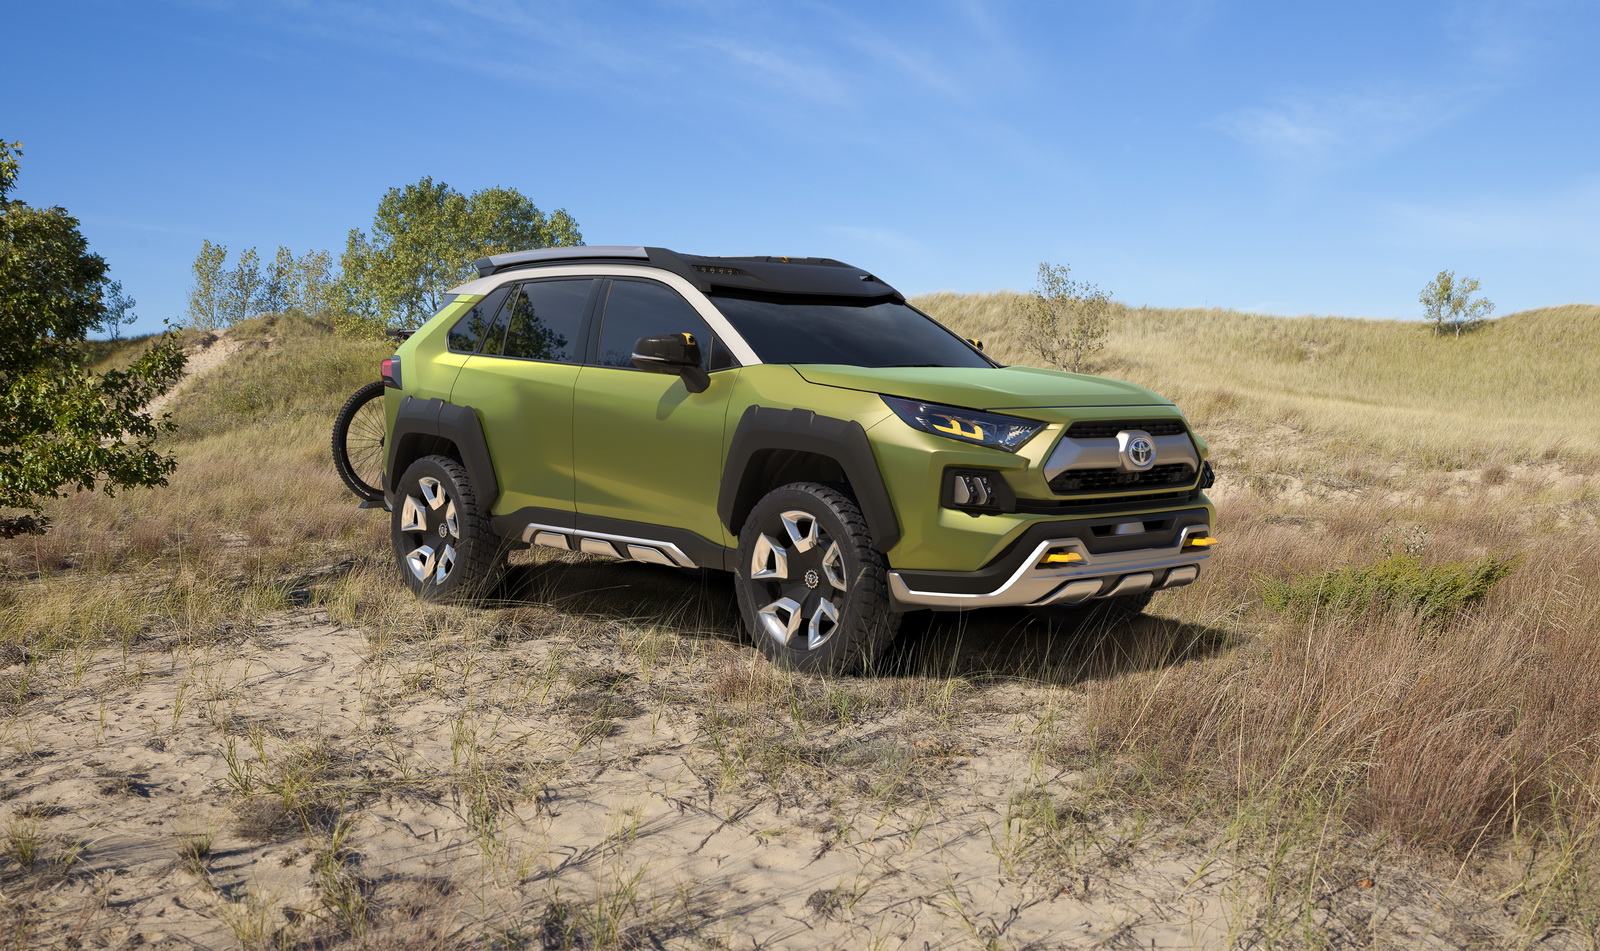 New Toyota FTAC Concept Is A Macho Compact SUV For Adventurers Carscoops